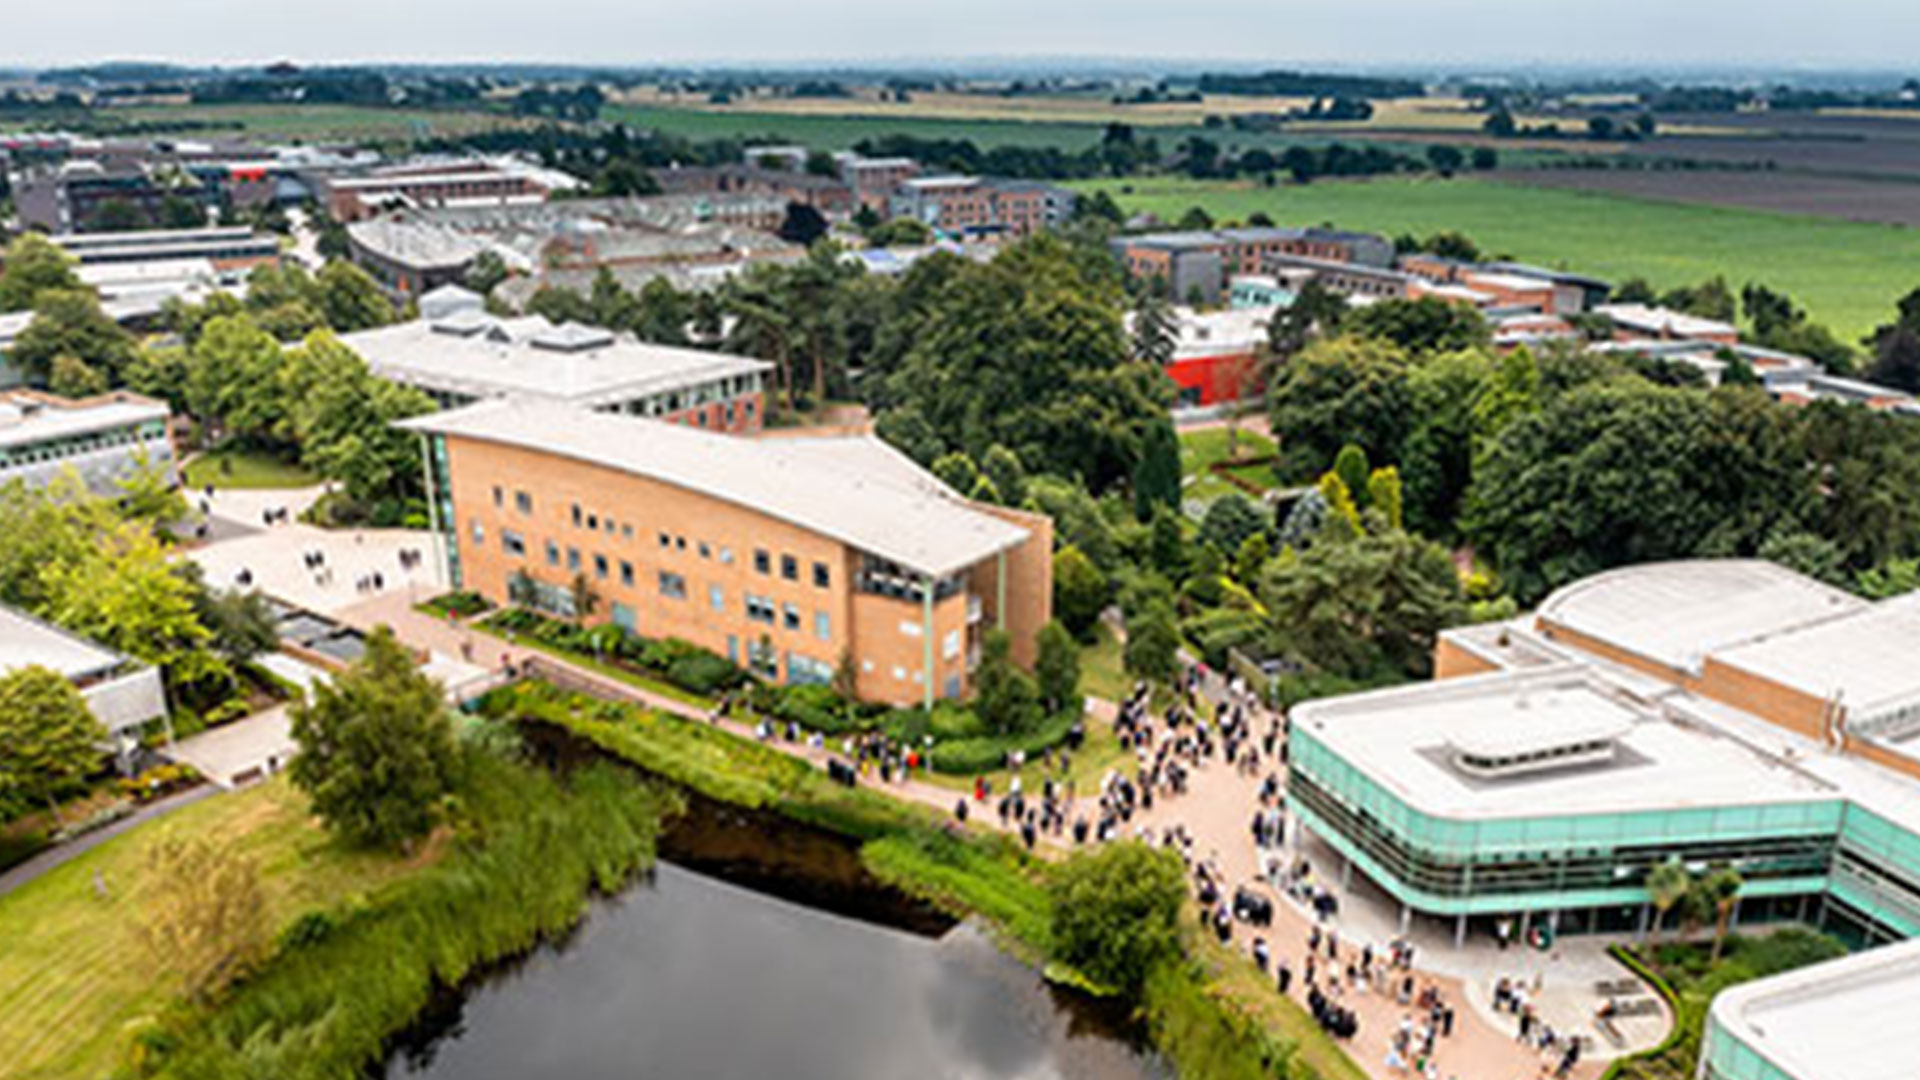 A drone shot of the Faculty of Health and Clinical Skills building, with lots of people walking about on campus